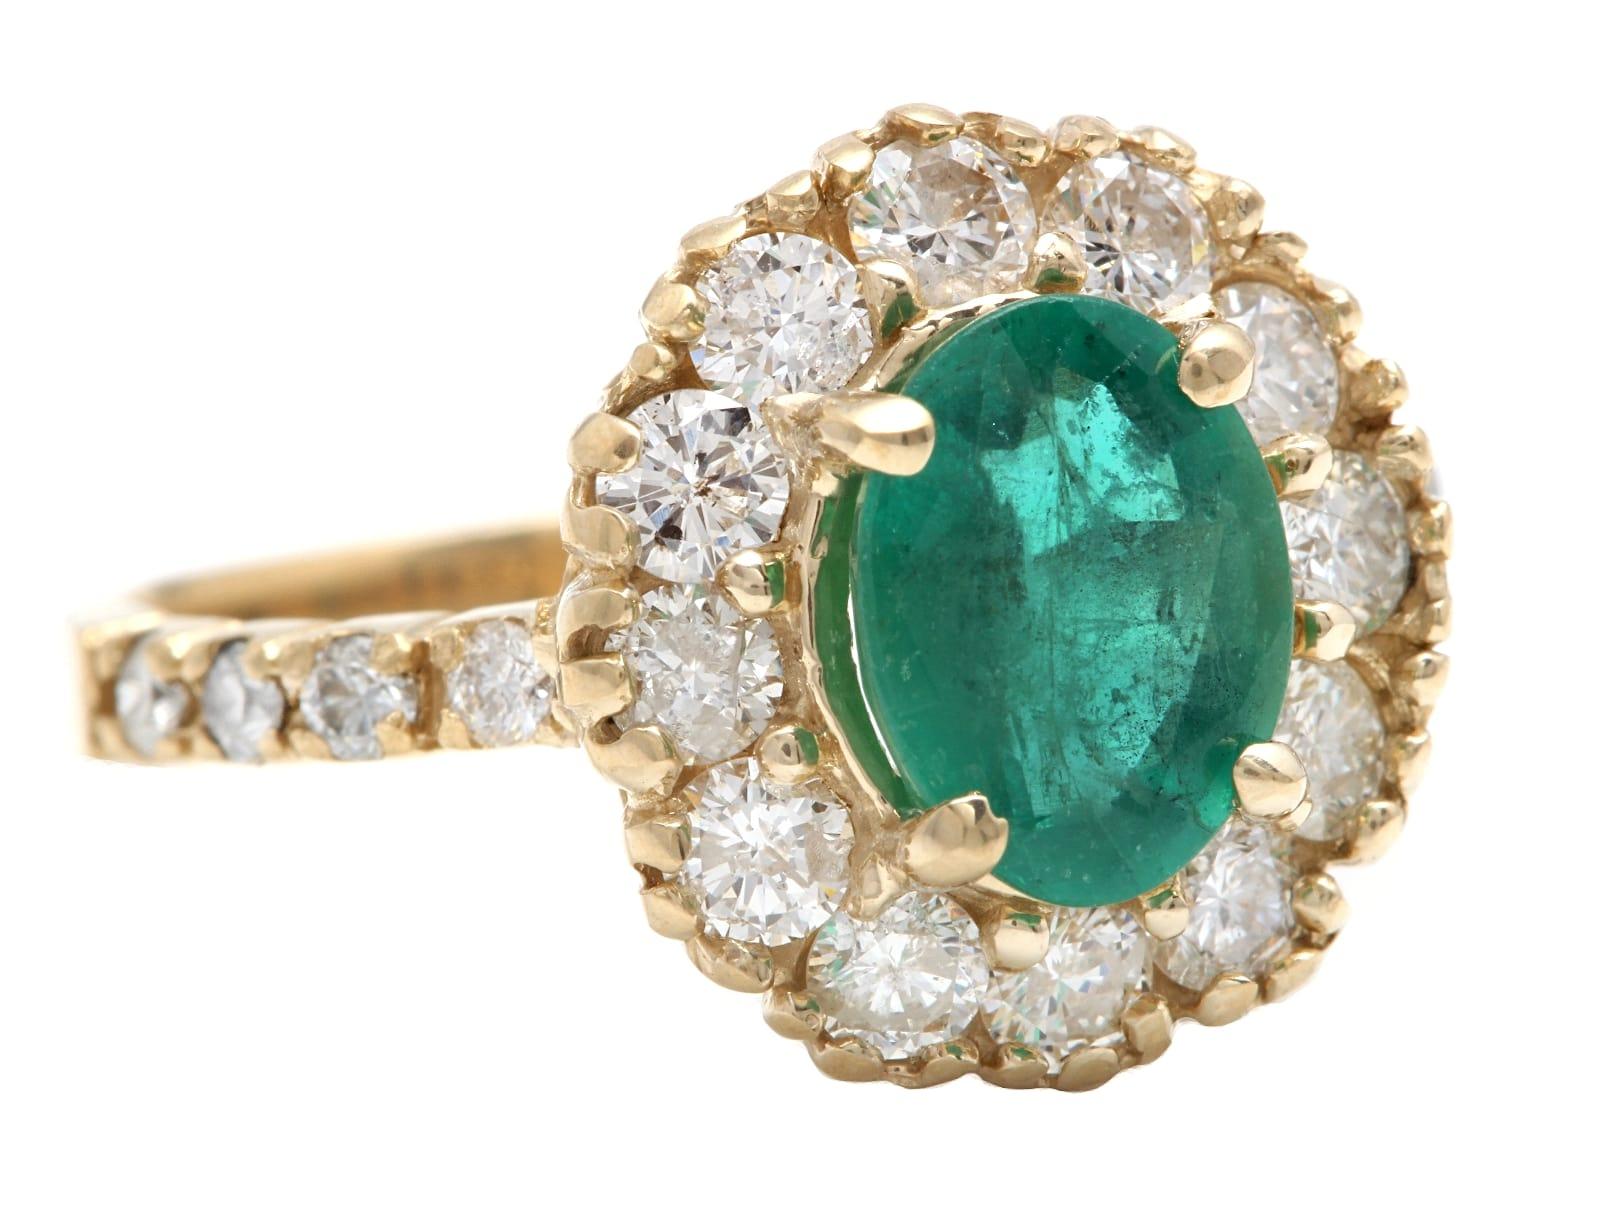 2.50 Carats Natural Emerald and Diamond 14K Solid Yellow Gold Ring

Suggested Replacement Value: Approx. $6,000.00

Total Natural Green Emerald Weight is: Approx. 1.50 Carats (transparent)

Emerald Measures: Approx. 8.60 x 6.60mm

Emerald Treatment: